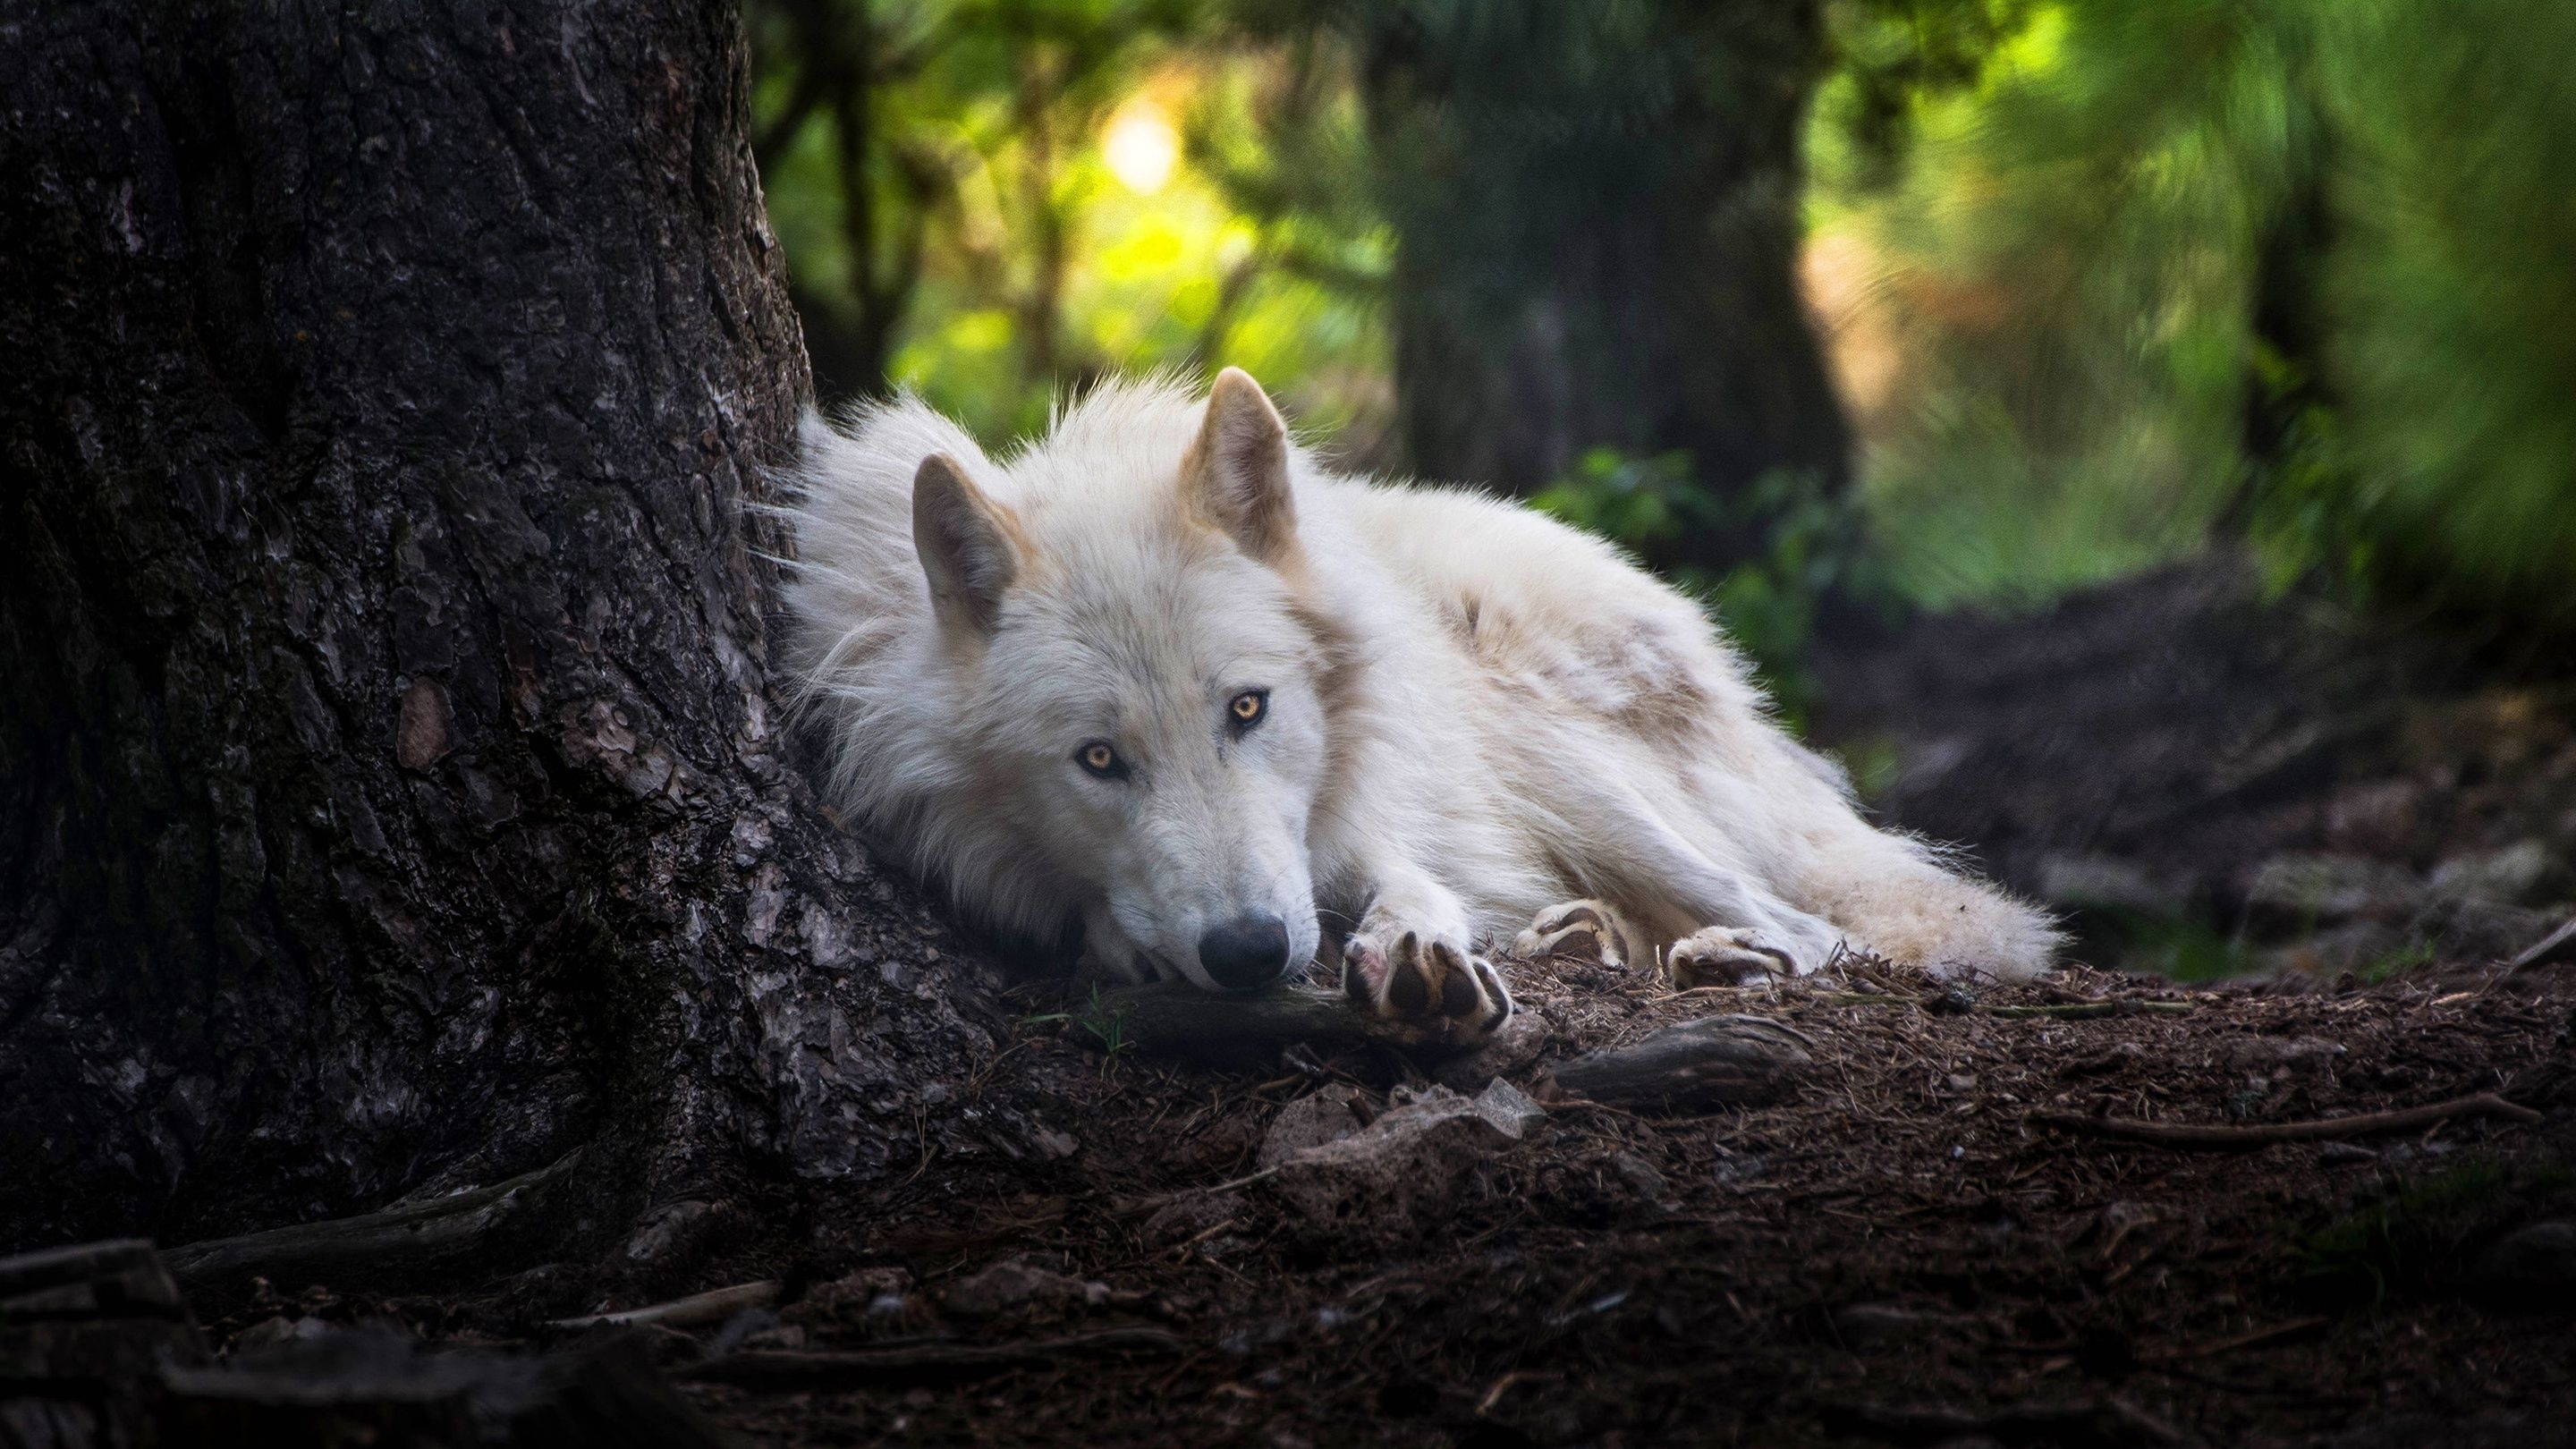 Arctic Wolf, White wolf laptop wallpapers, Snowy landscapes, Arctic serenity, 2880x1620 HD Desktop